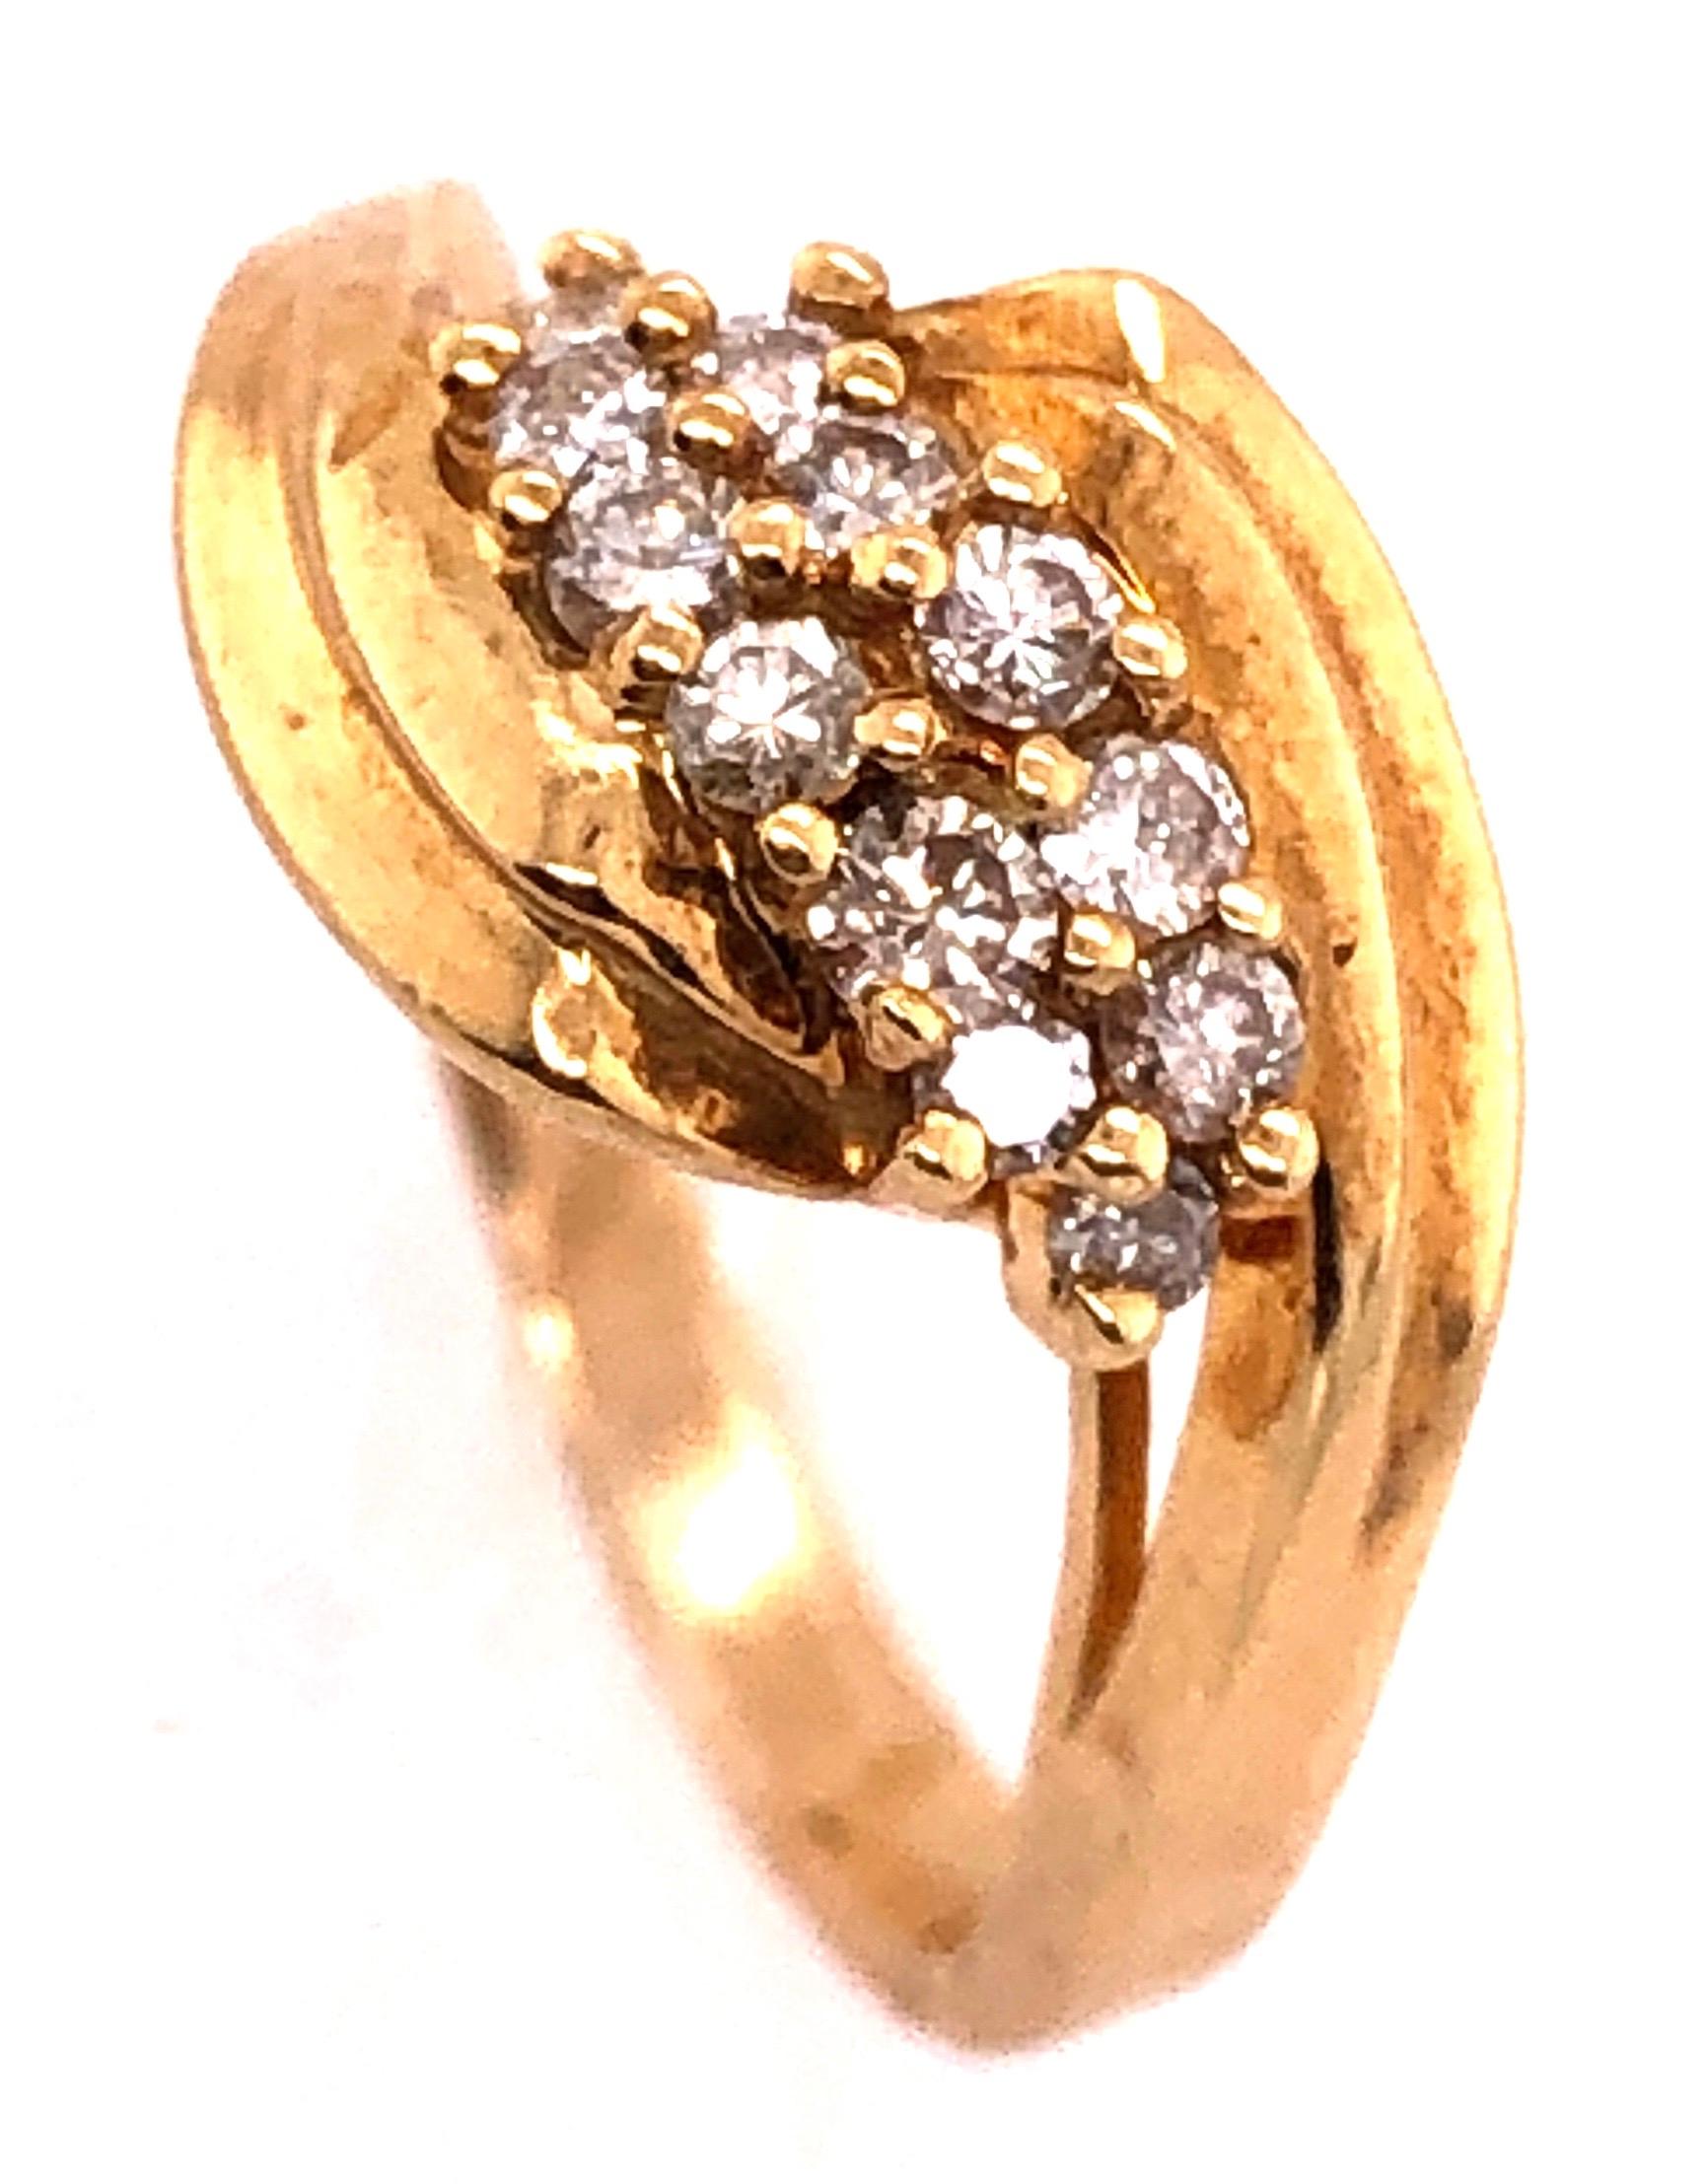 14 Karat Yellow Gold Free Form Ring with Diamonds 
0.50 TDW.
Size 5.5
4.84 grams total weight.